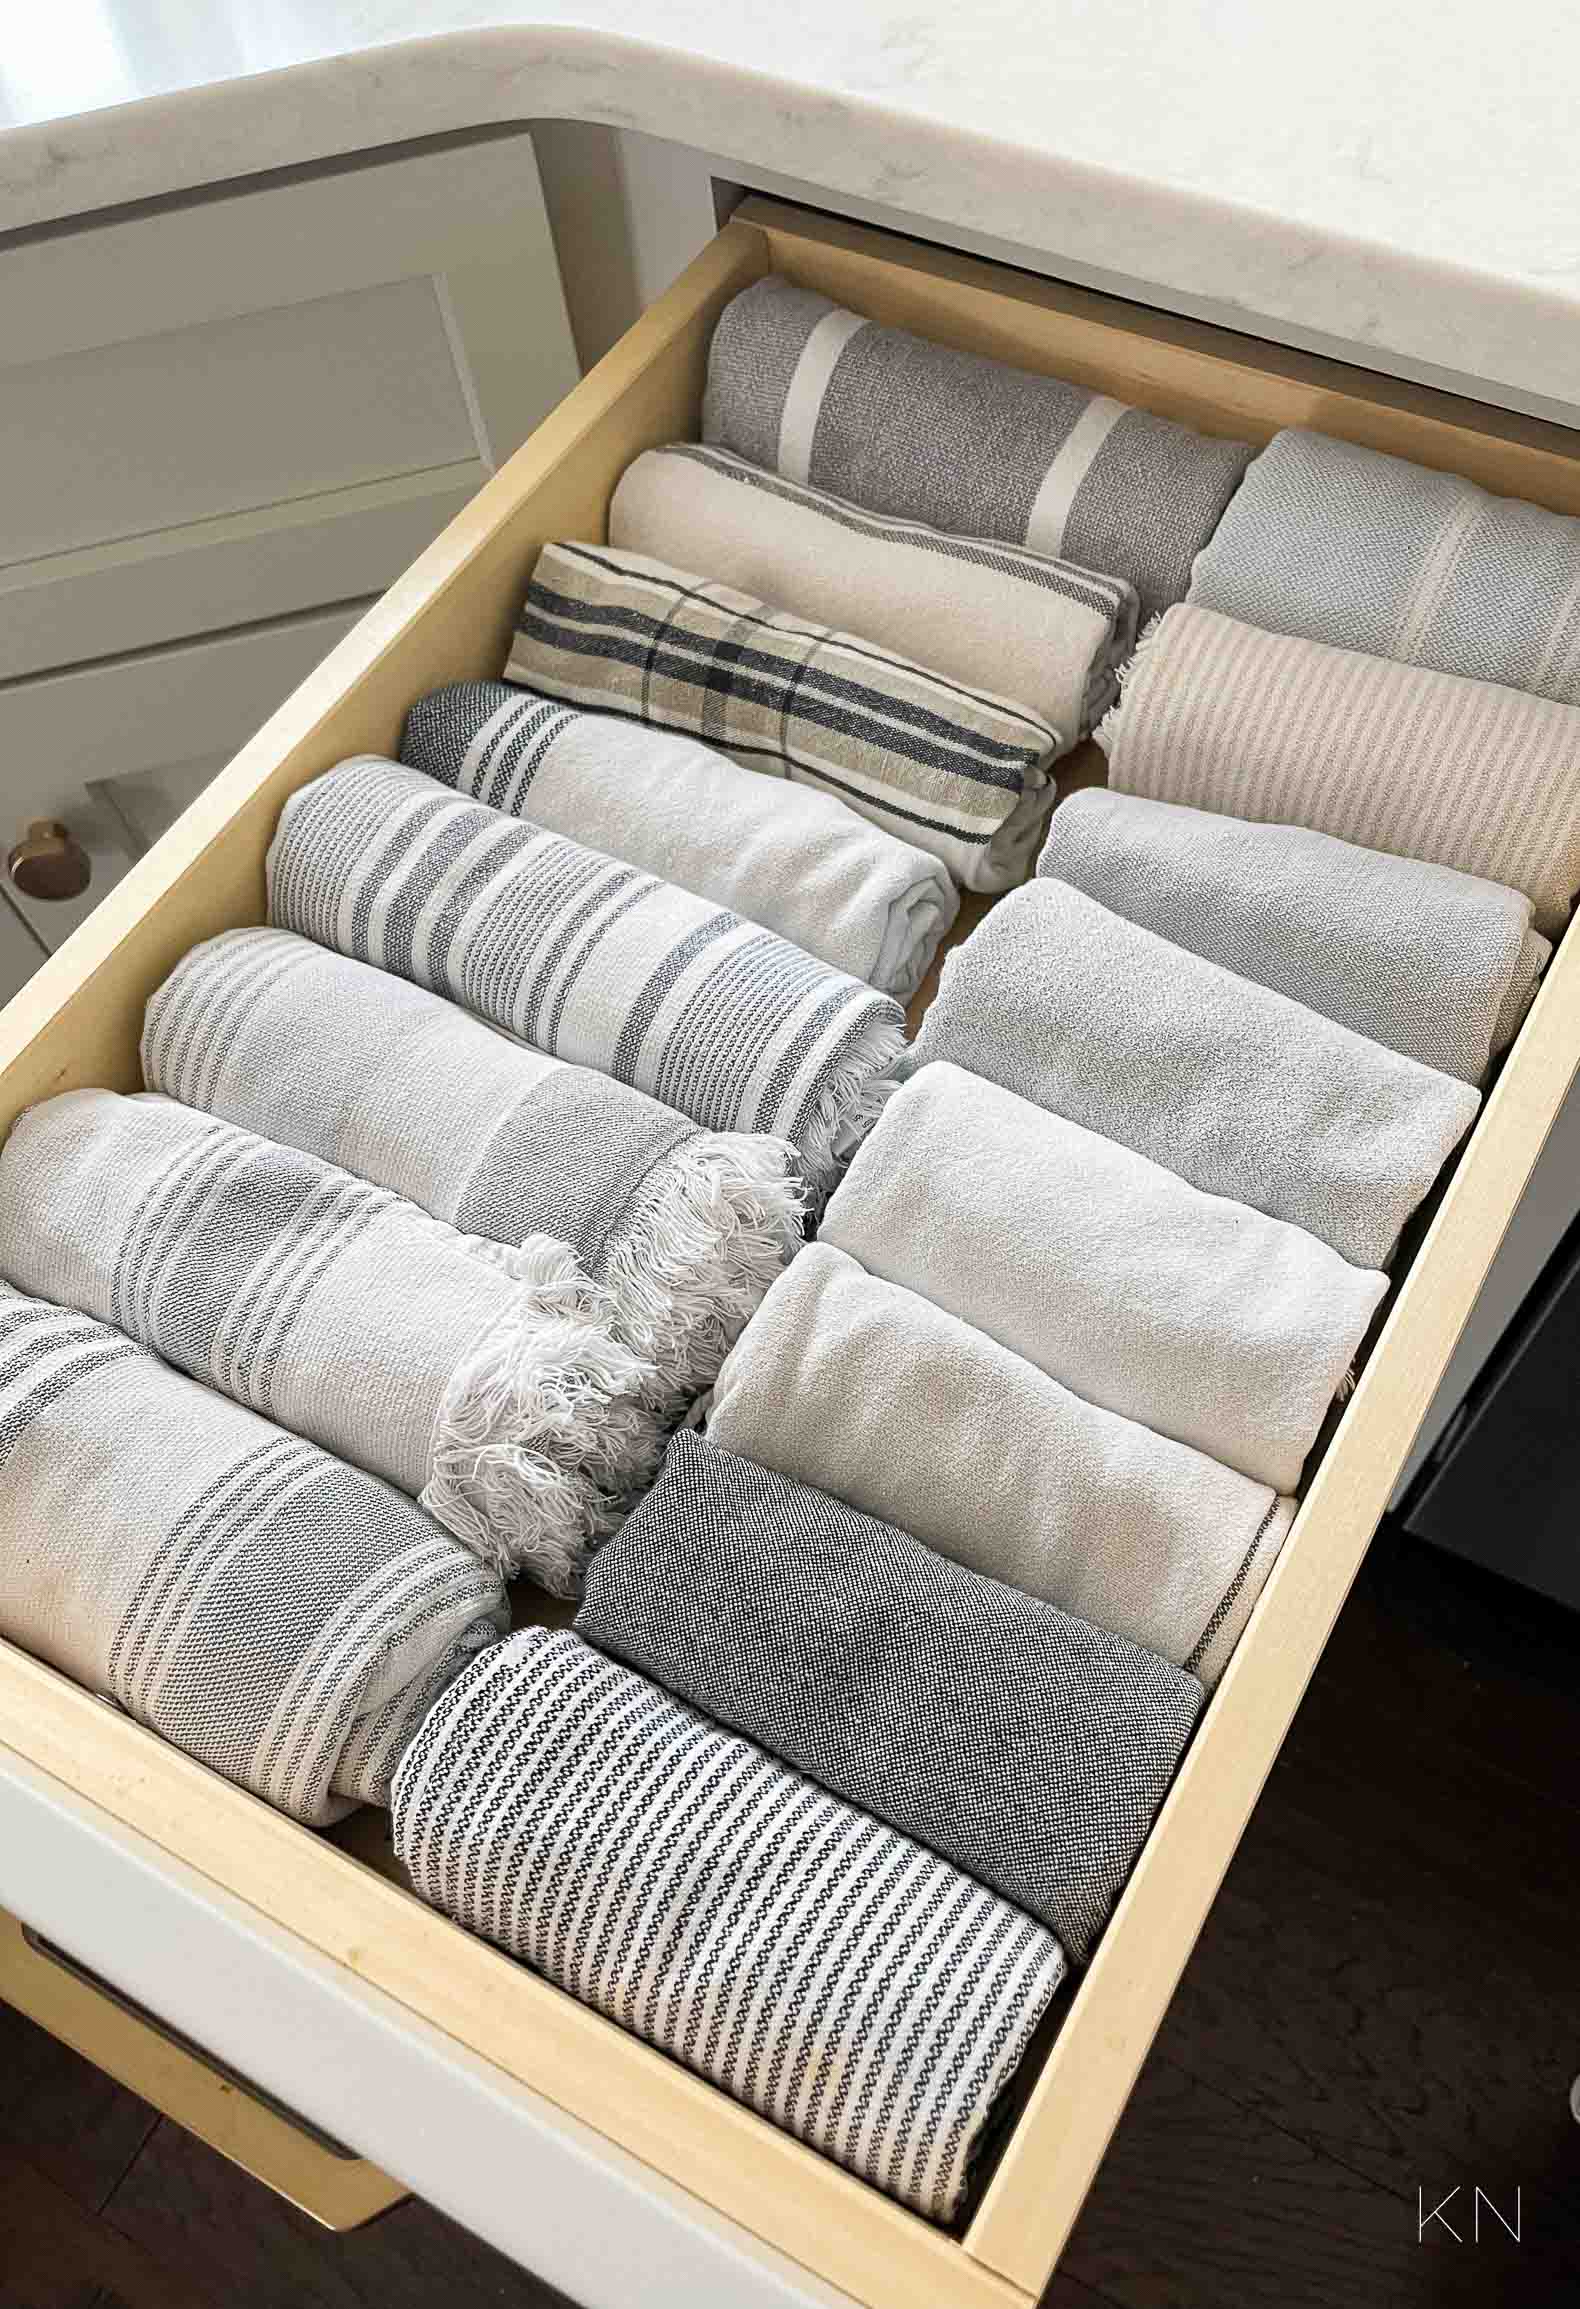 How to Store and Organize Kitchen Towels in the Kitchen